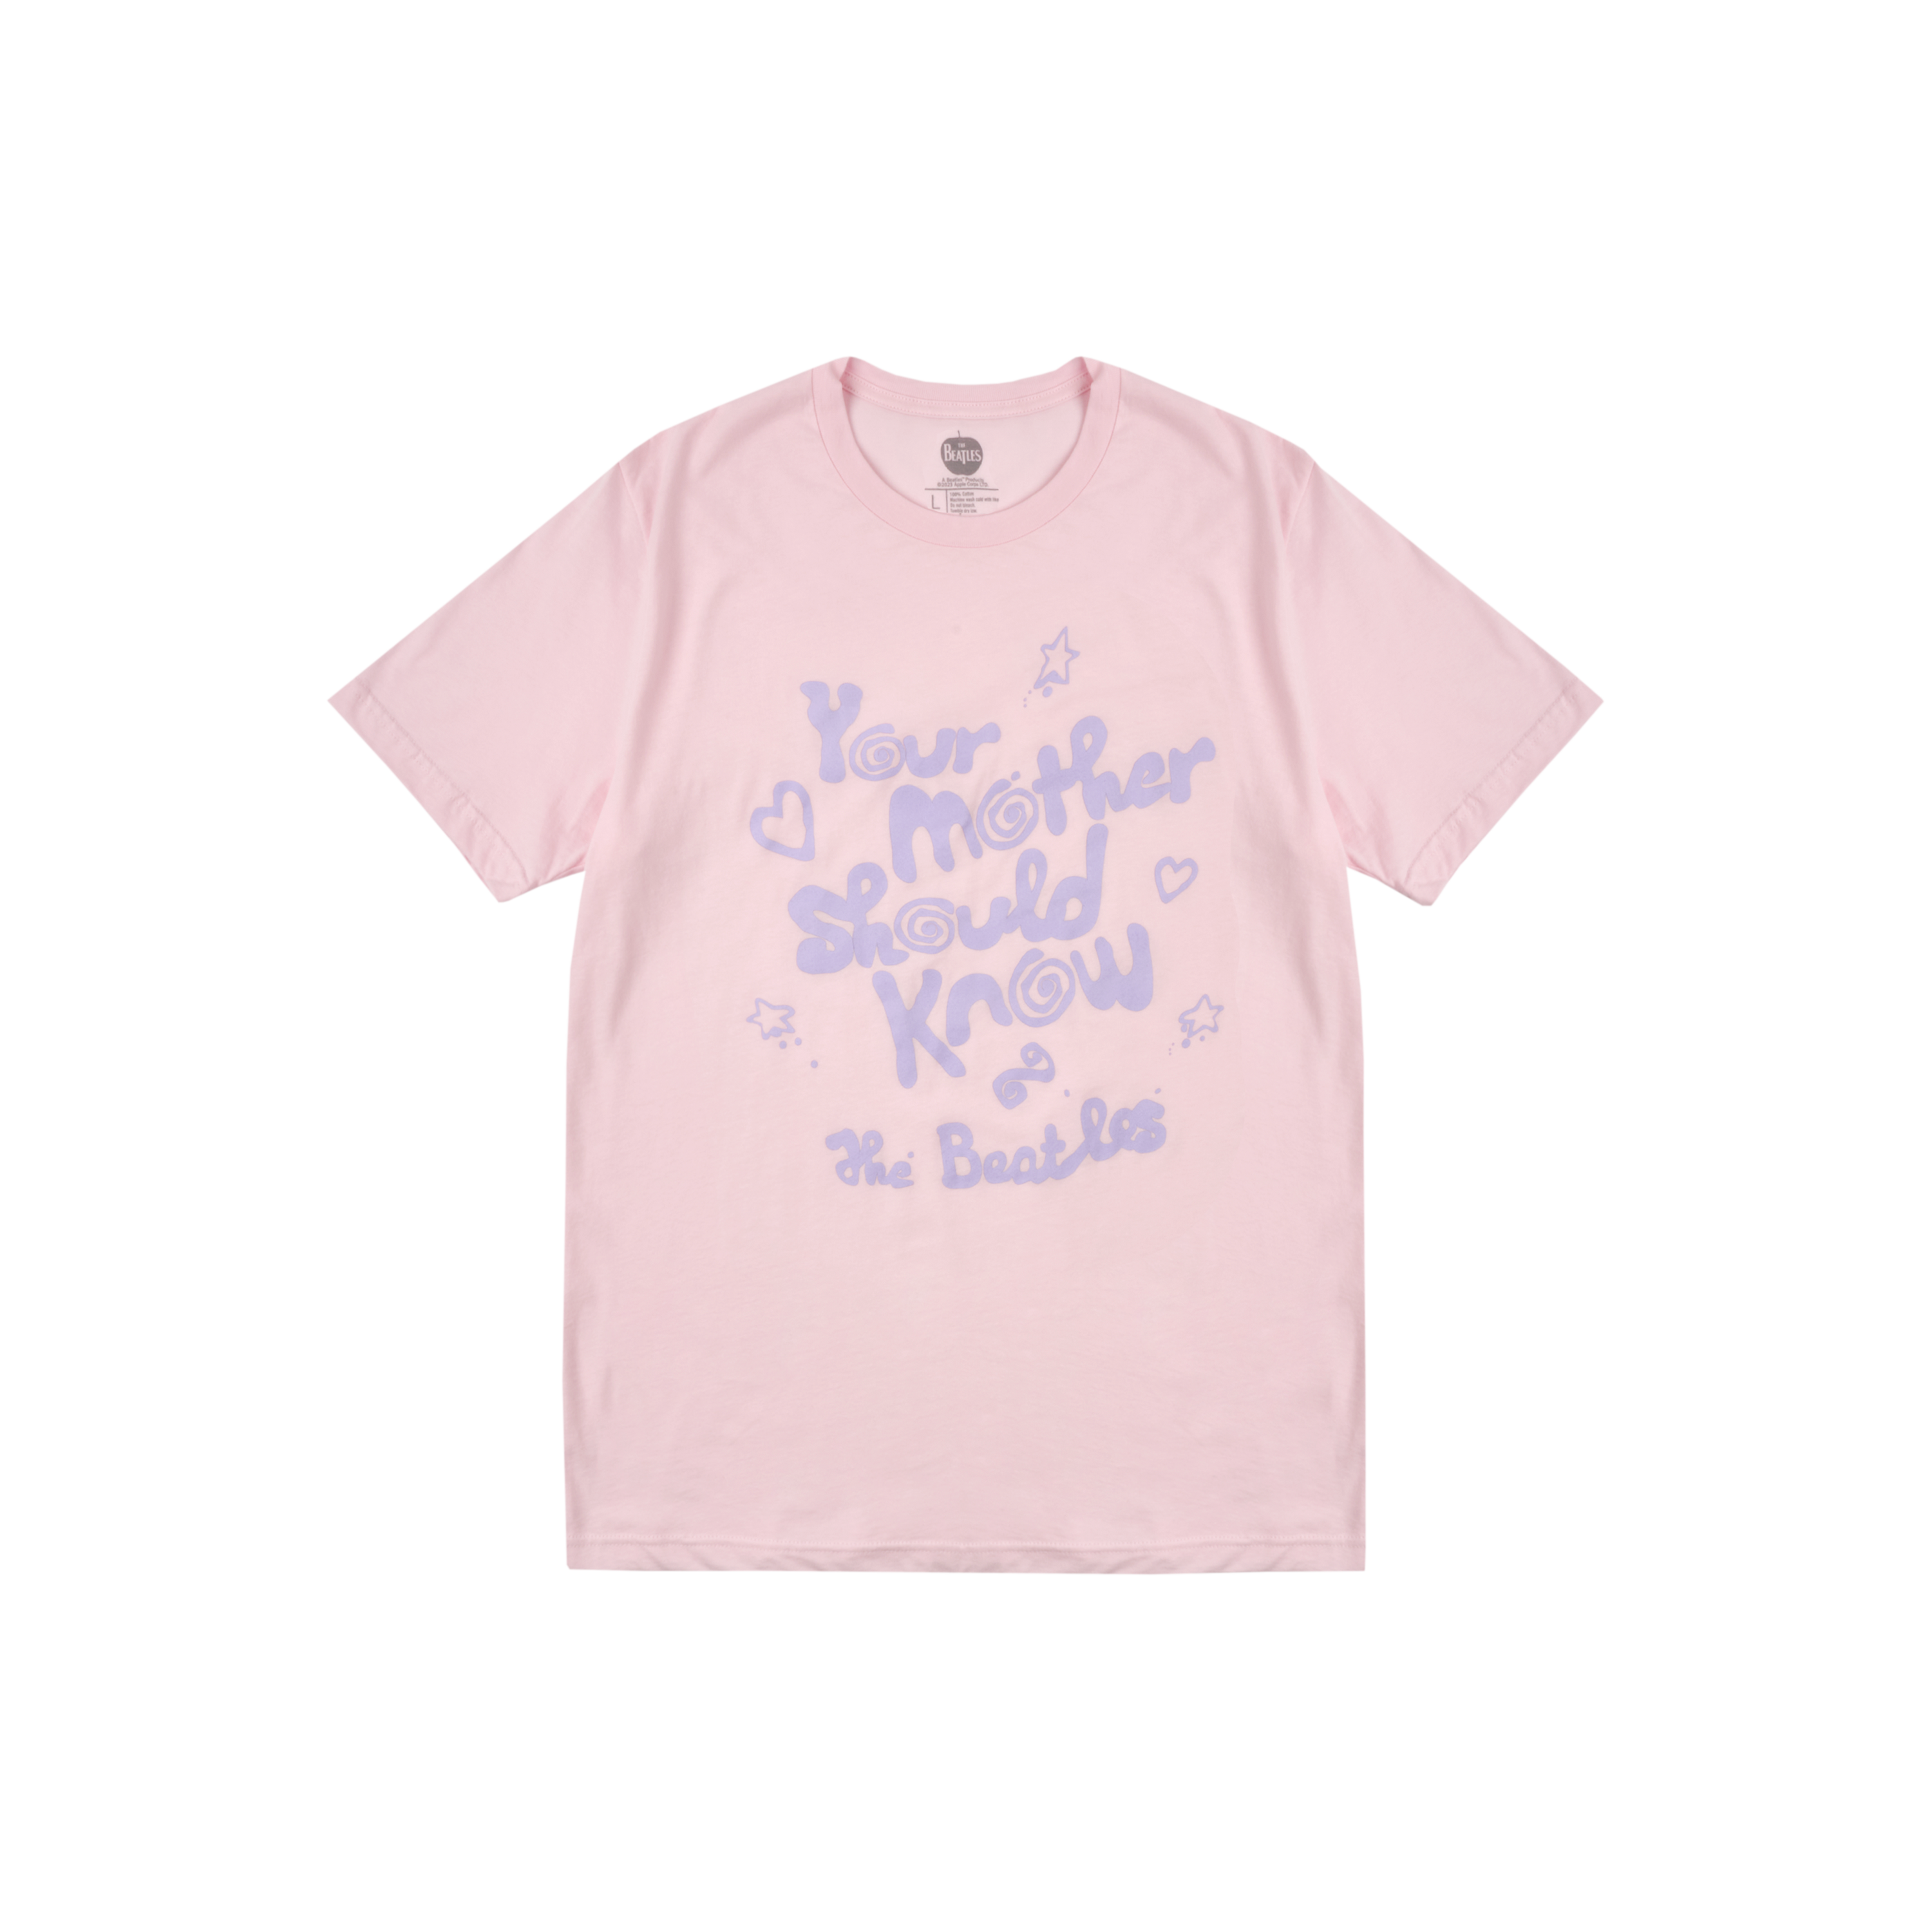 Your Mother Should Know Pink T-Shirt